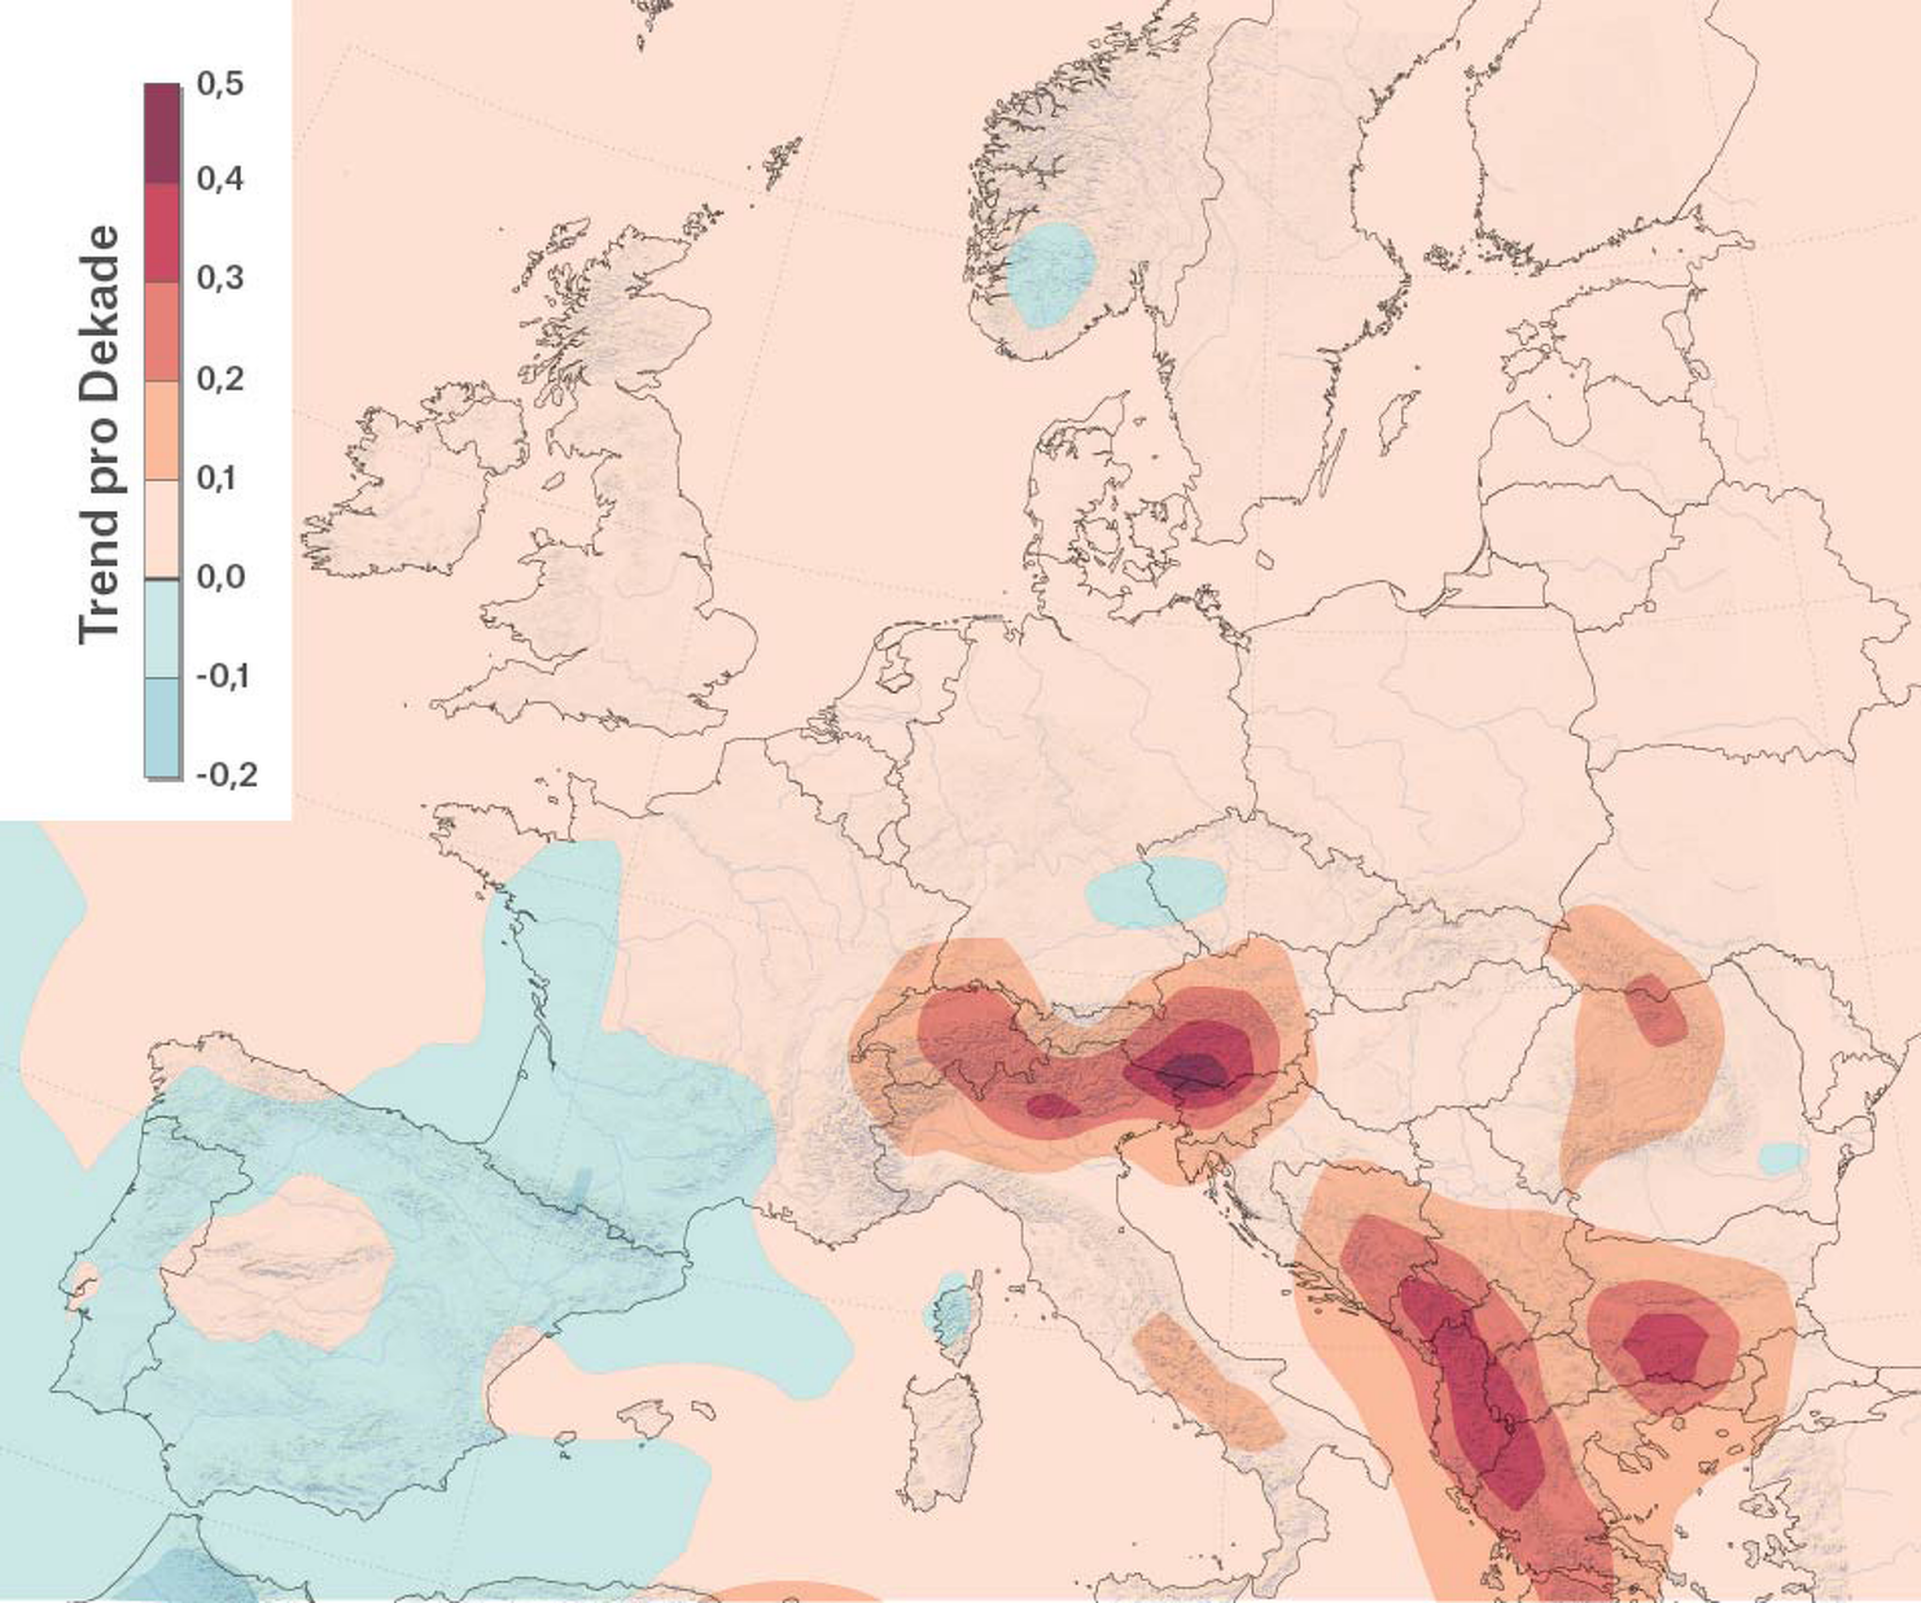 Number of hail events in Europe overall increased significantly over the years 1979-2015